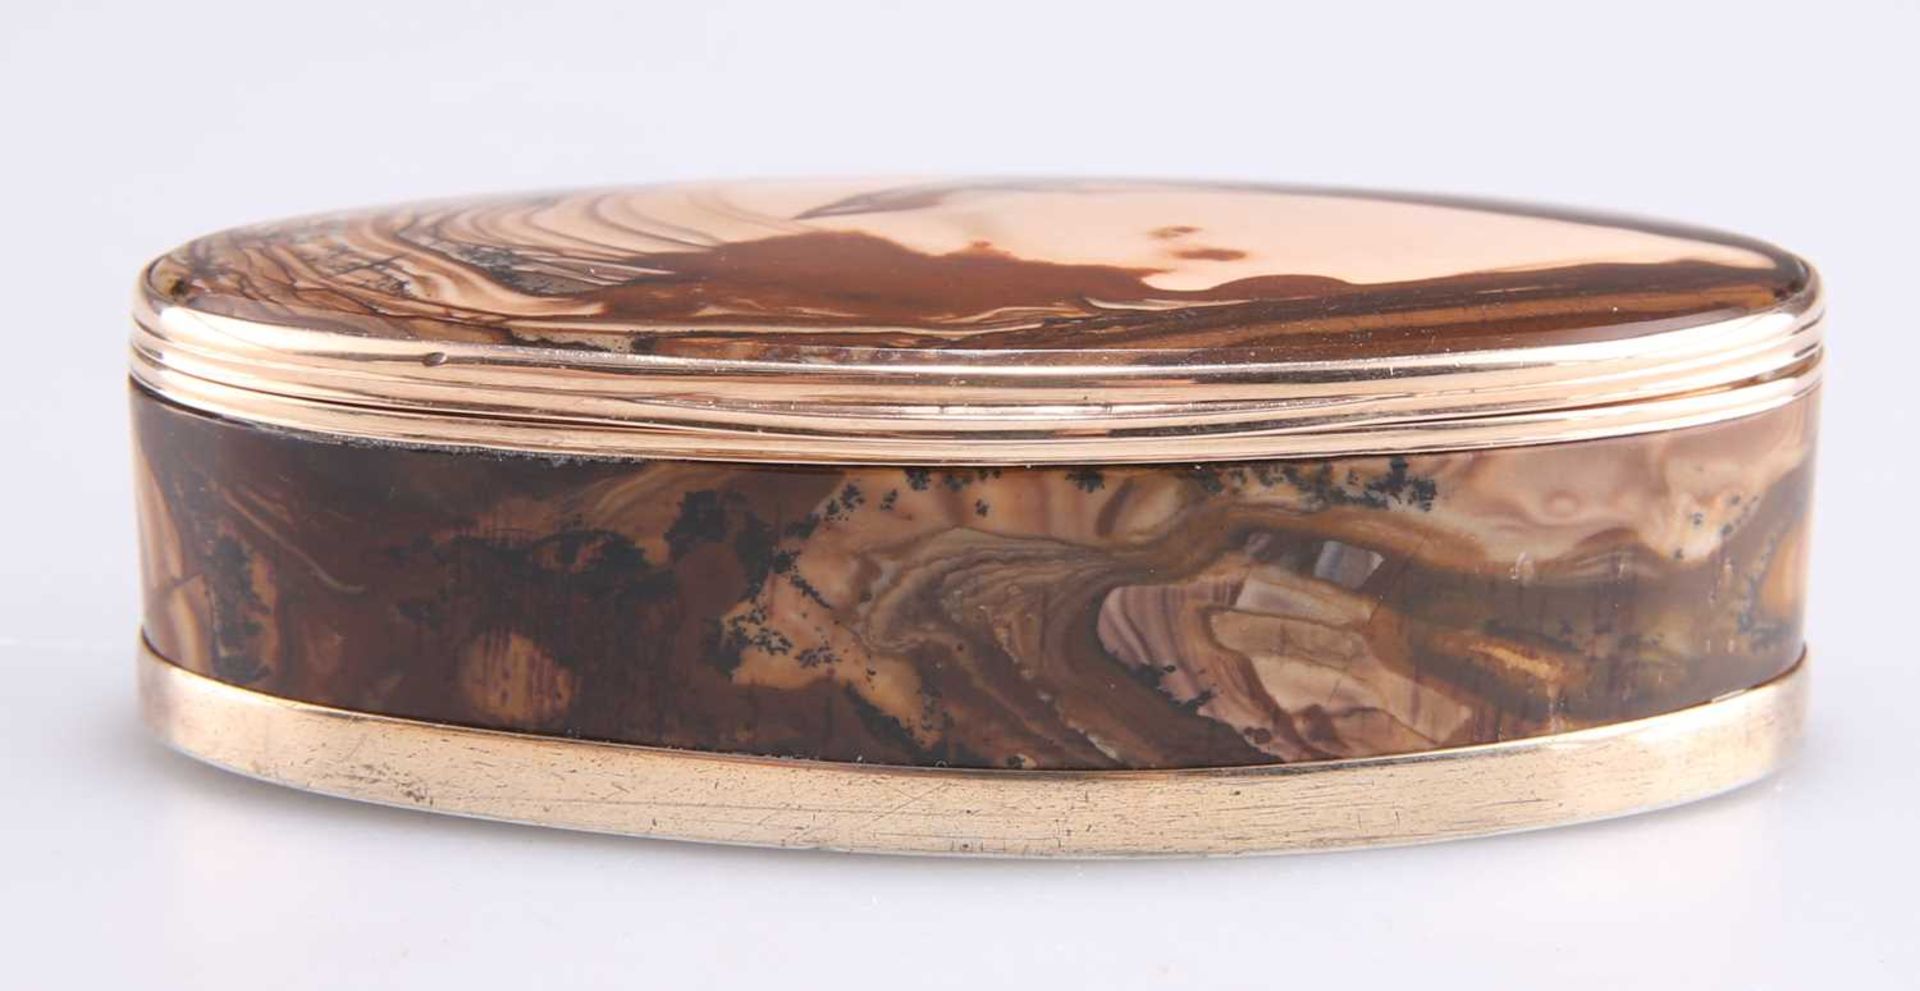 A FINE GOLD-MOUNTED AGATE BOX, FIRST HALF OF 19TH CENTURY